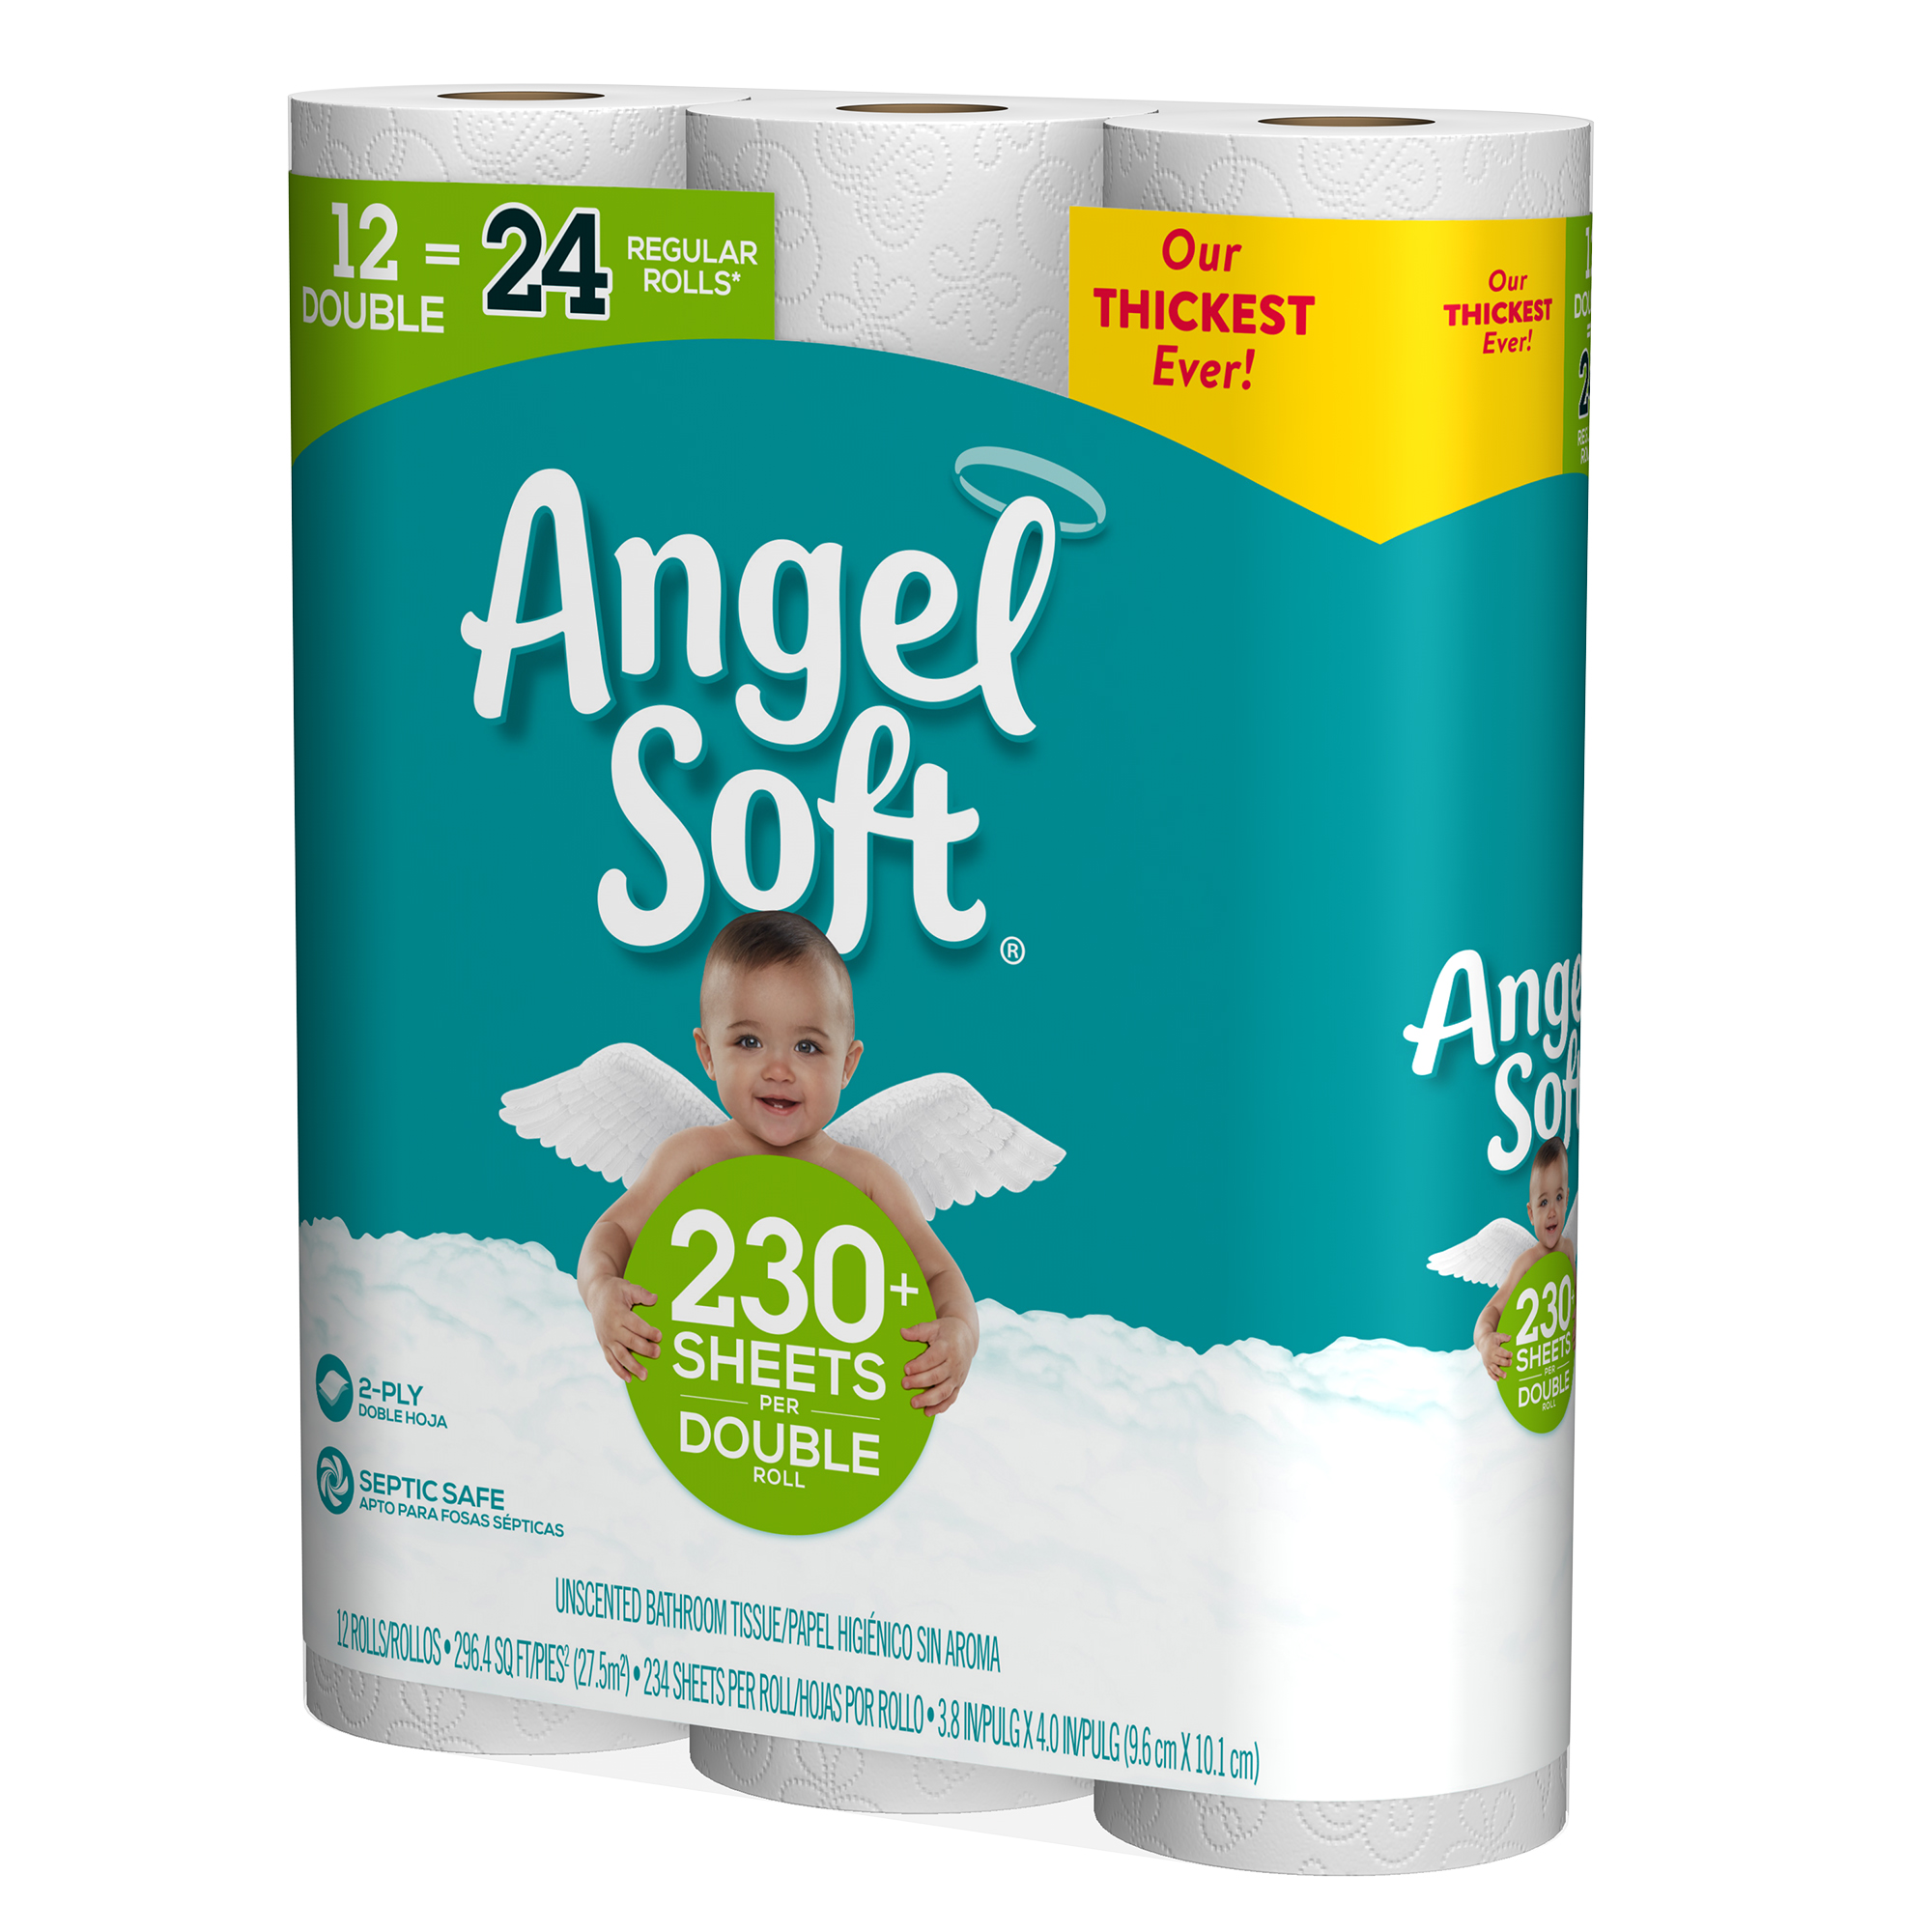 Angel Soft Toilet Paper, 12 Double Rolls - image 4 of 9